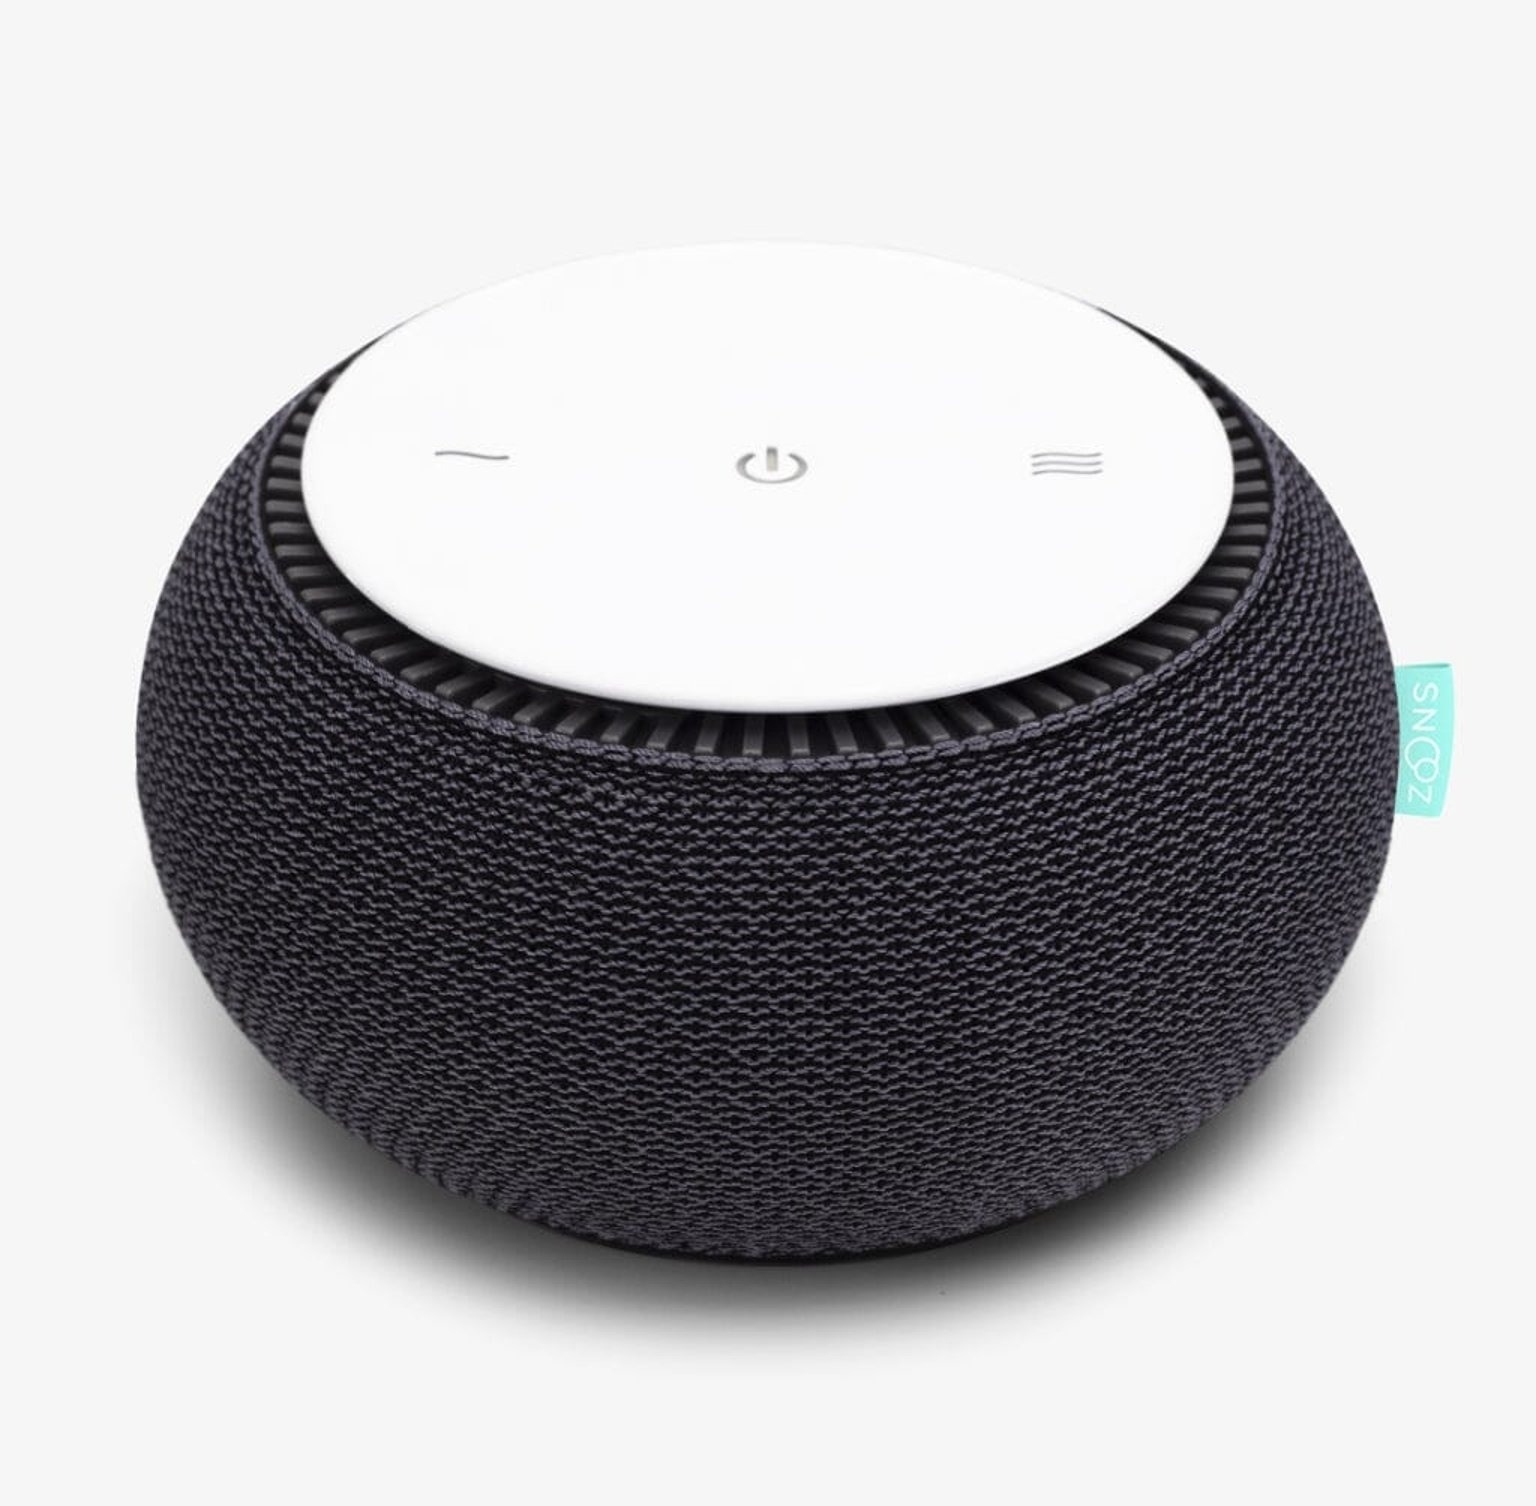 the charcoal colored white noise machine